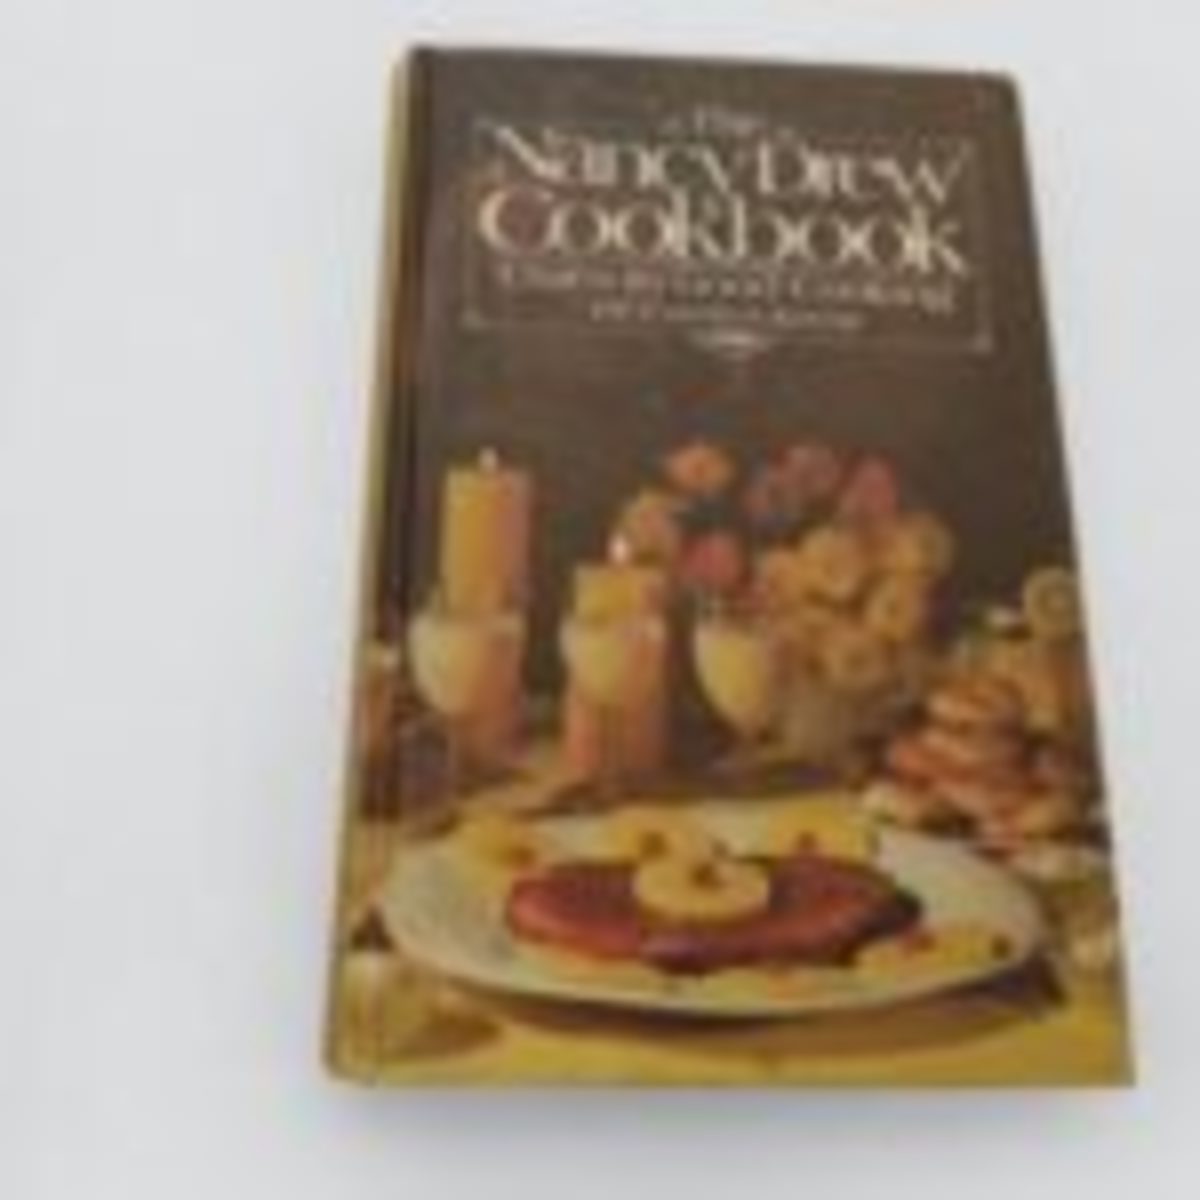 Nancy Drew Cookbook 1973 - signed by Harriet Stratemeyer Adams “Carolyn Keene” at the time. All Nancy Drew images courtesy of the Jennifer Fisher Collection